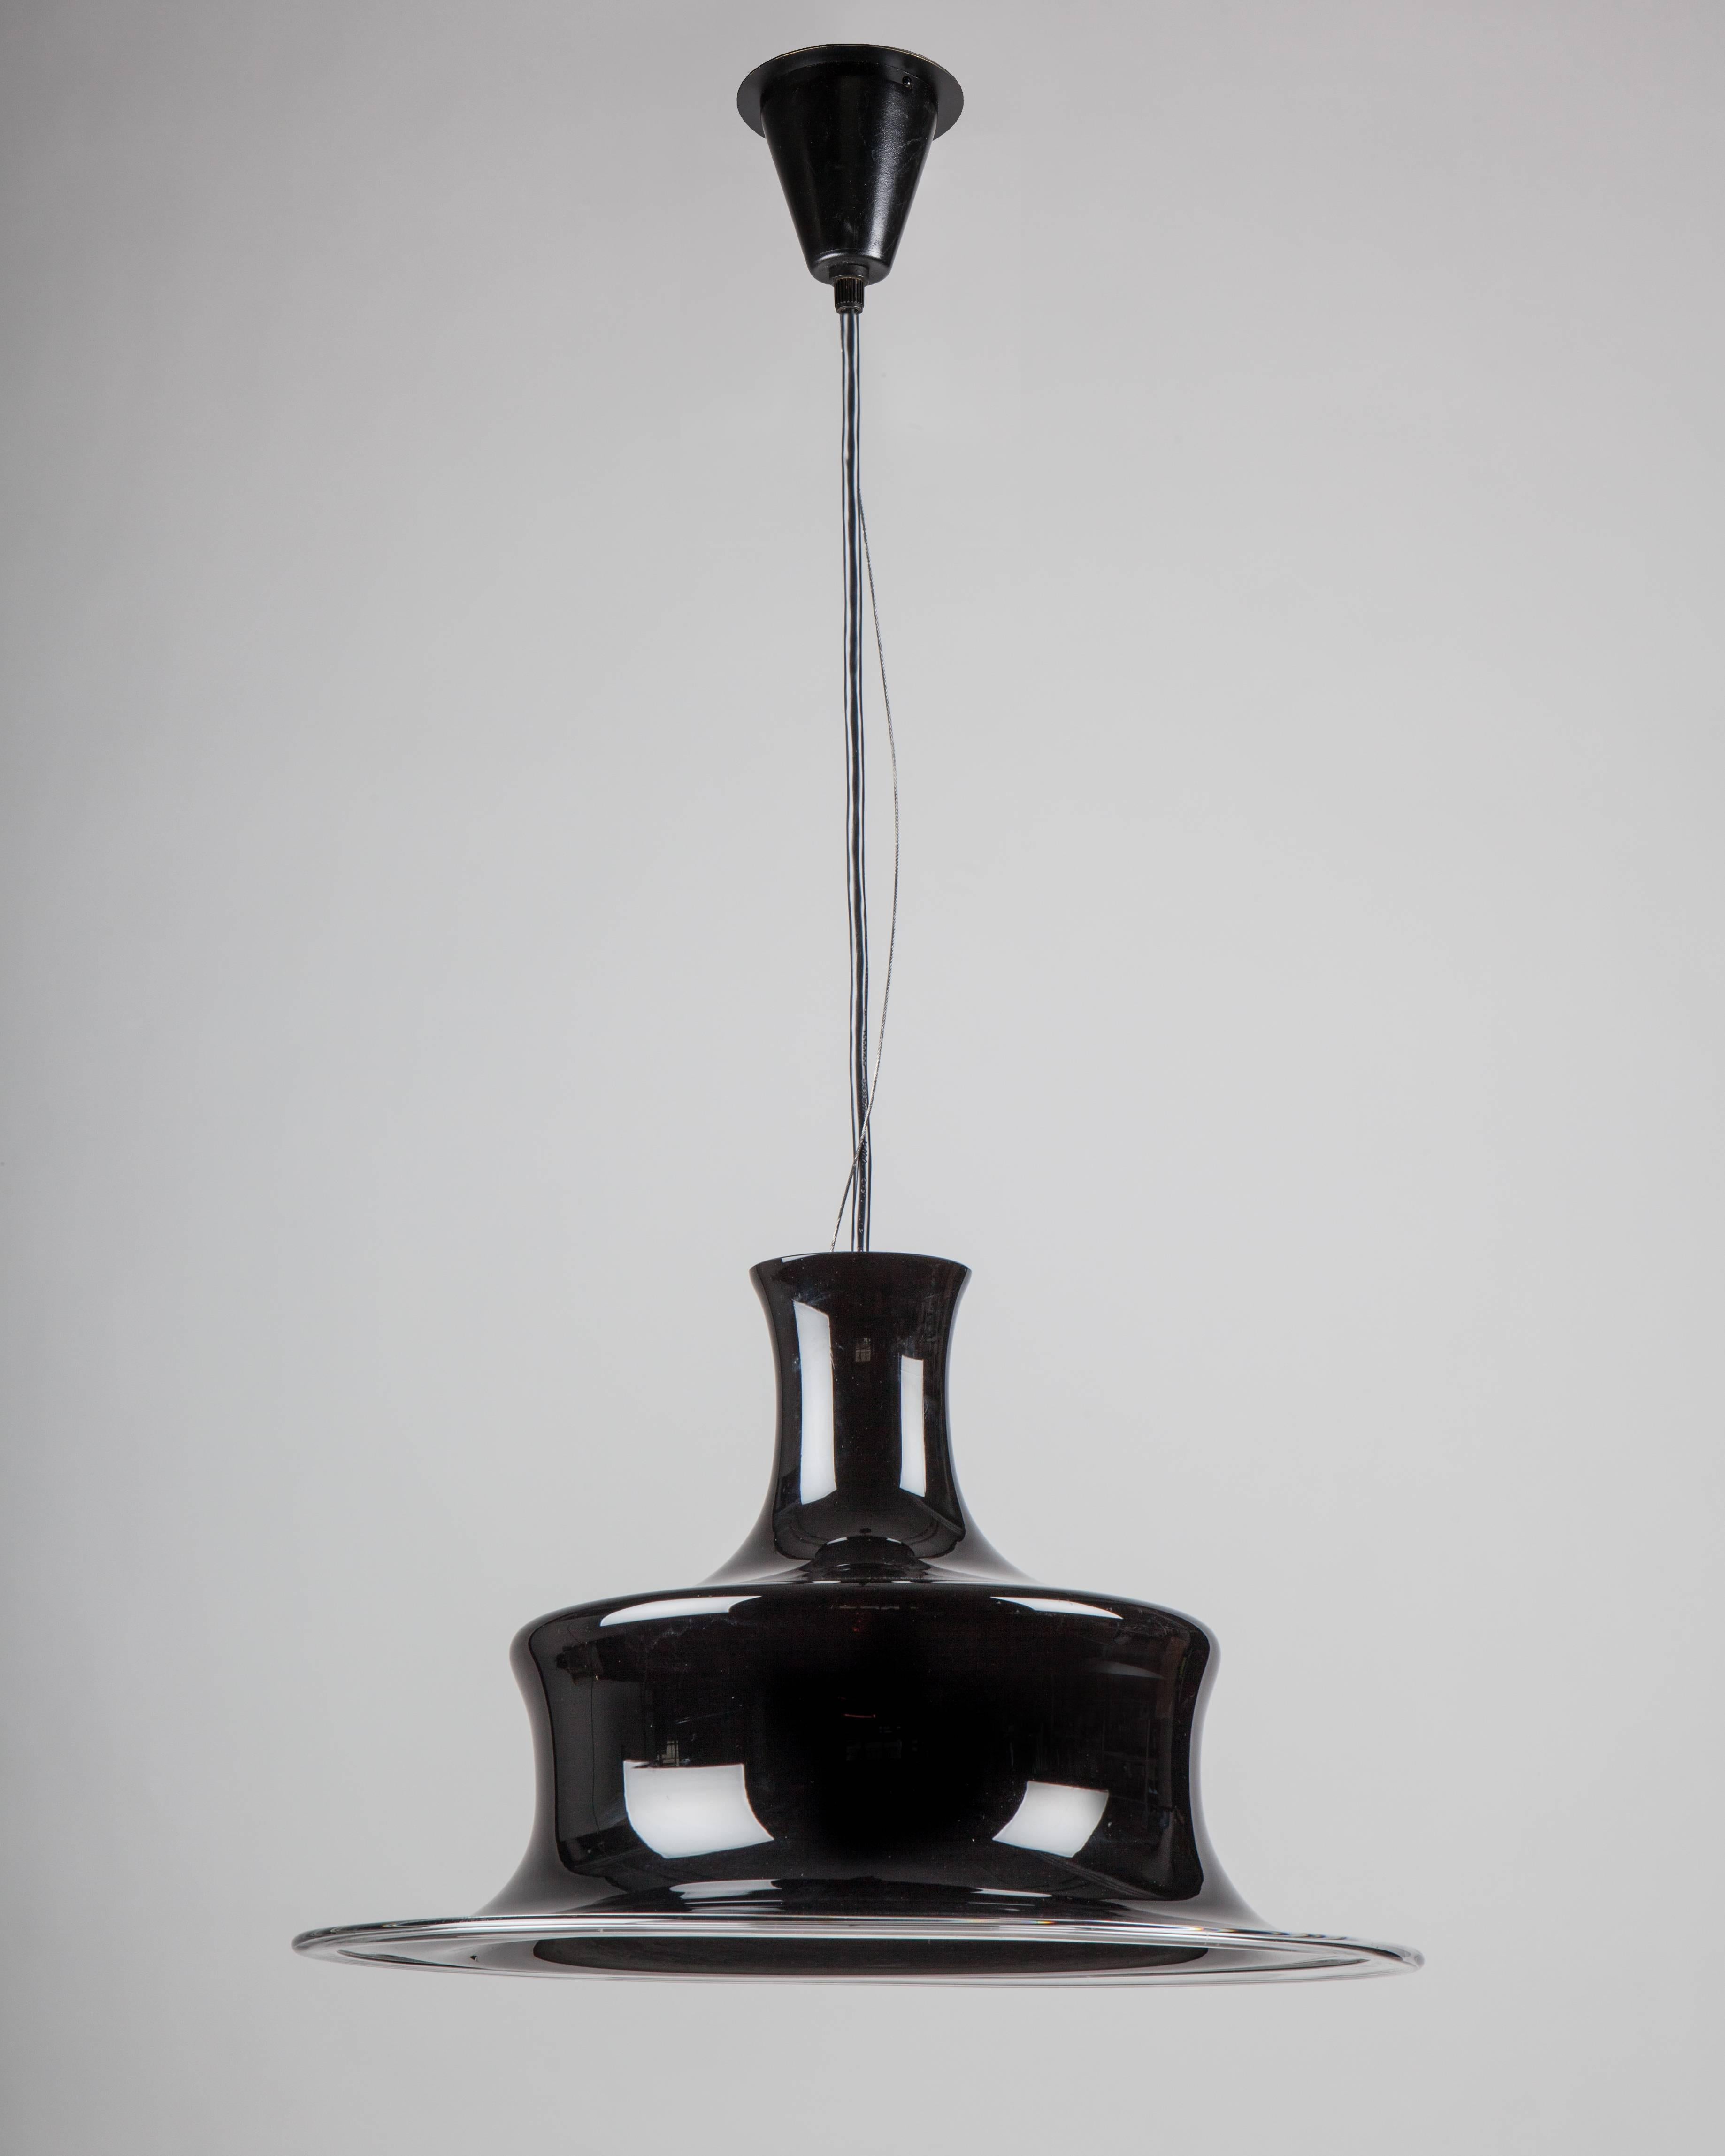 AHL3994.
A vintage pendant with dark ruby glass on its original fittings. Signed by the Danish glassmaker Holmegaard. Due to the antique nature of this fixture, there may be some nicks or imperfections in the glass as well as variations from piece